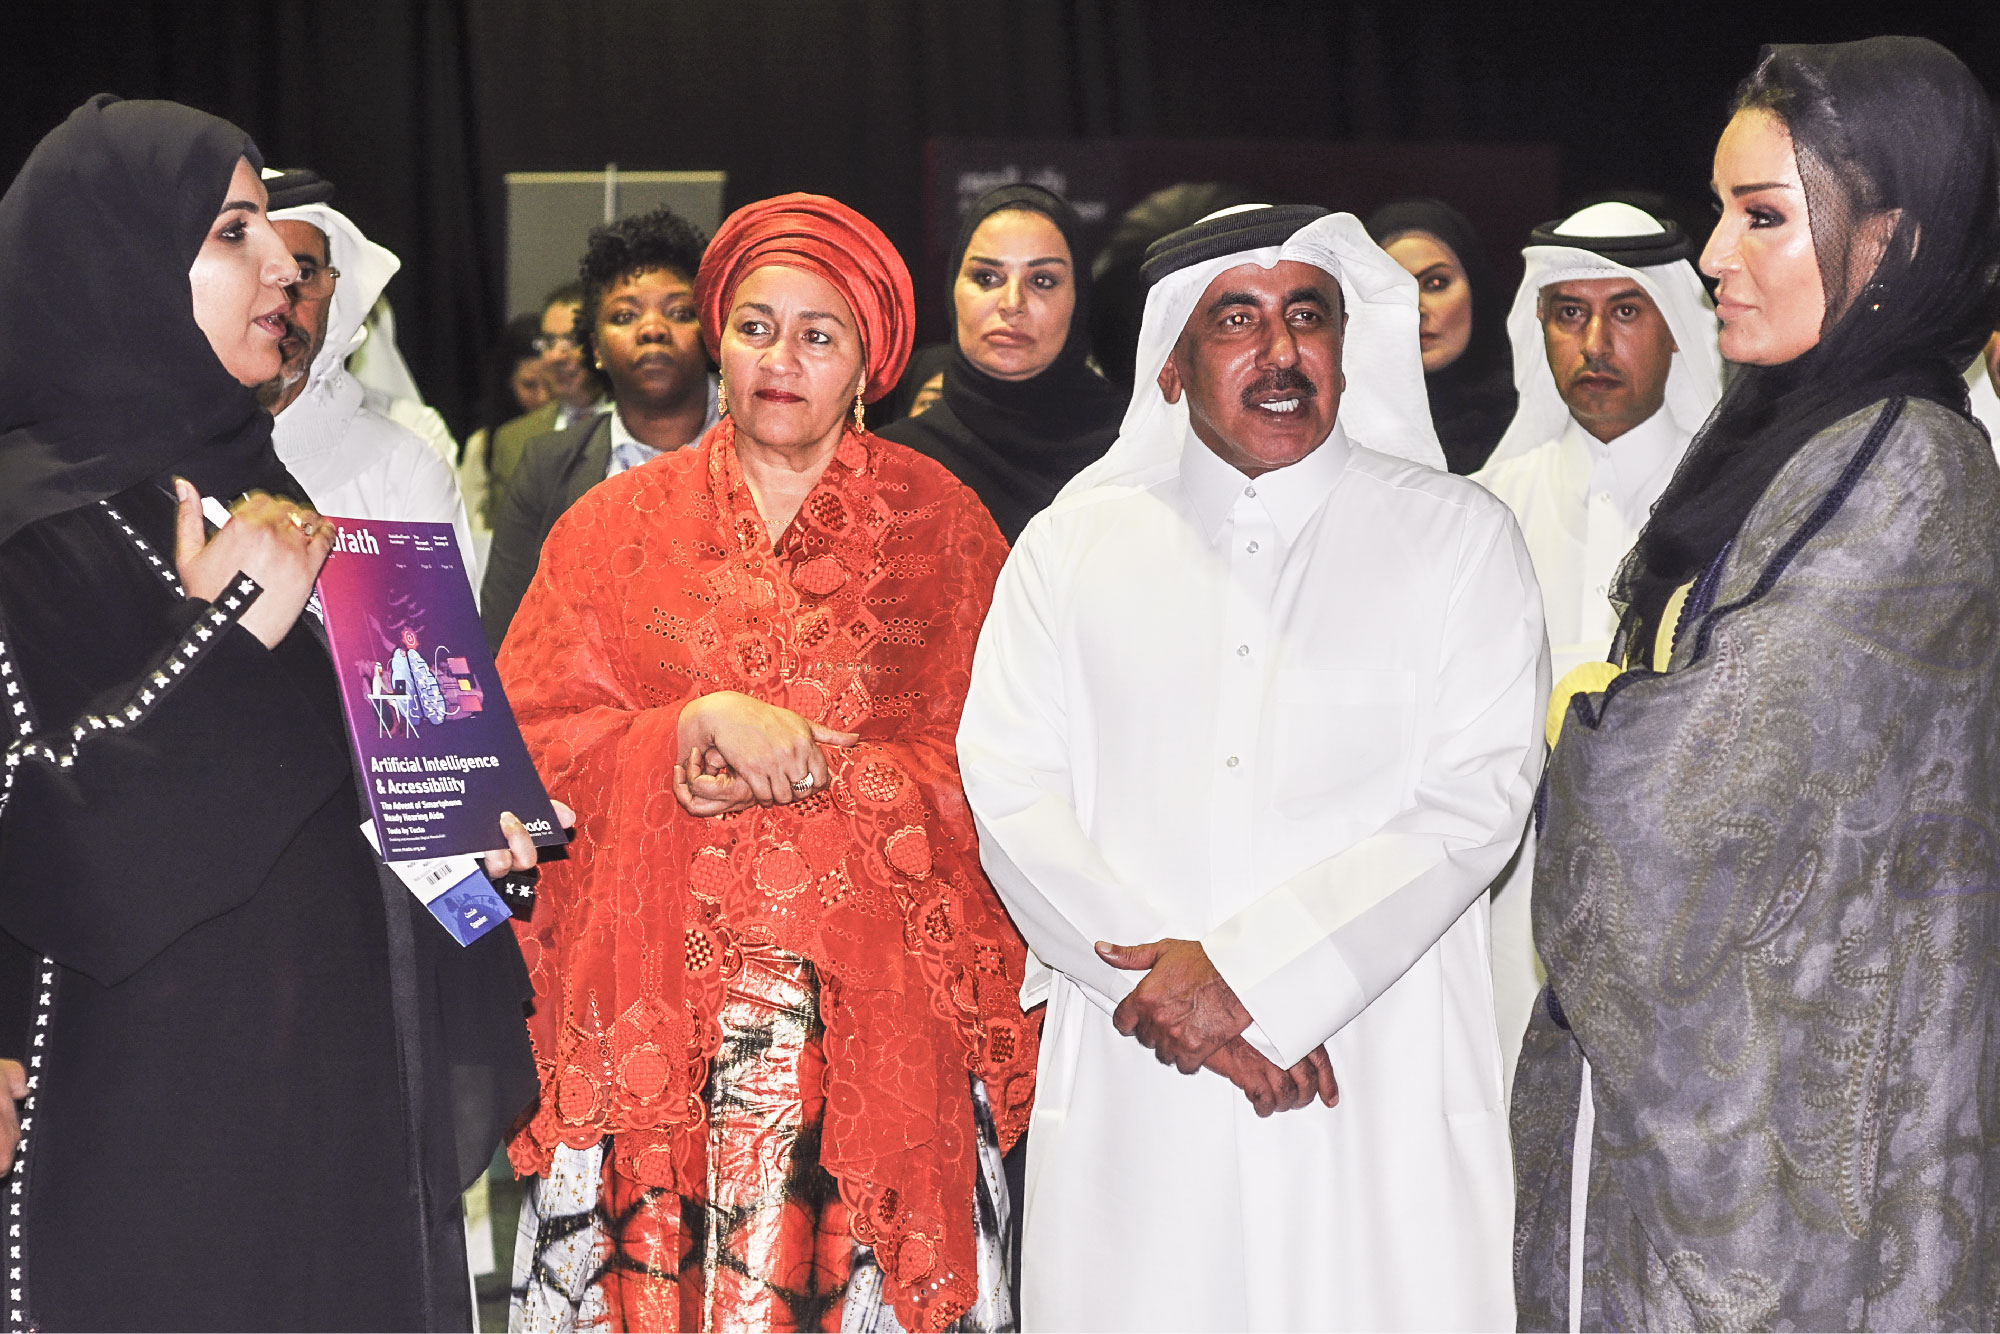 Doha International Conference on Disability and Development